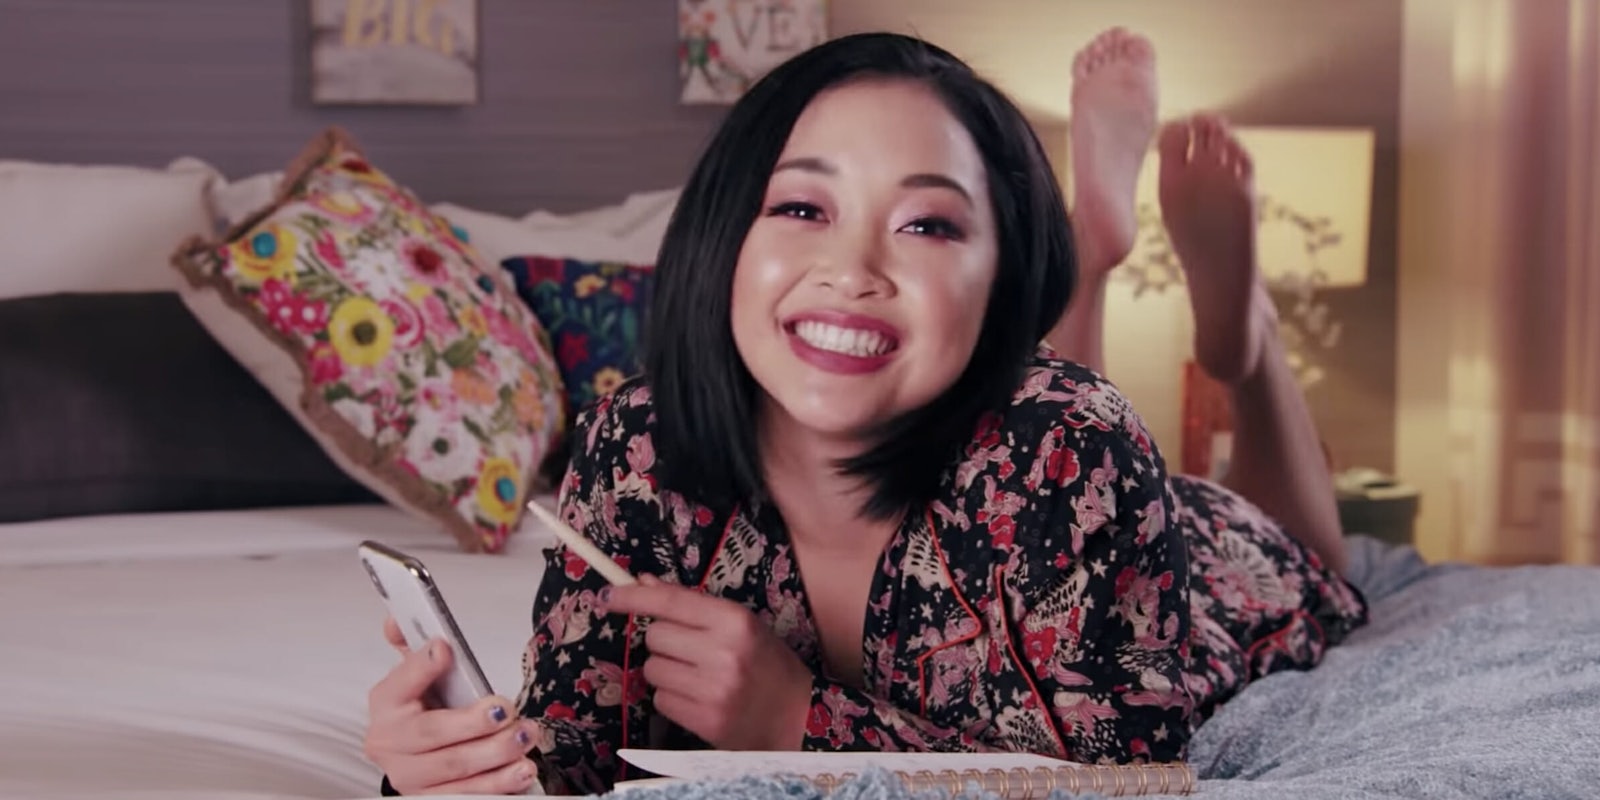 Netflix announces 'To All the Boys I've Loved Before' is getting a sequel.